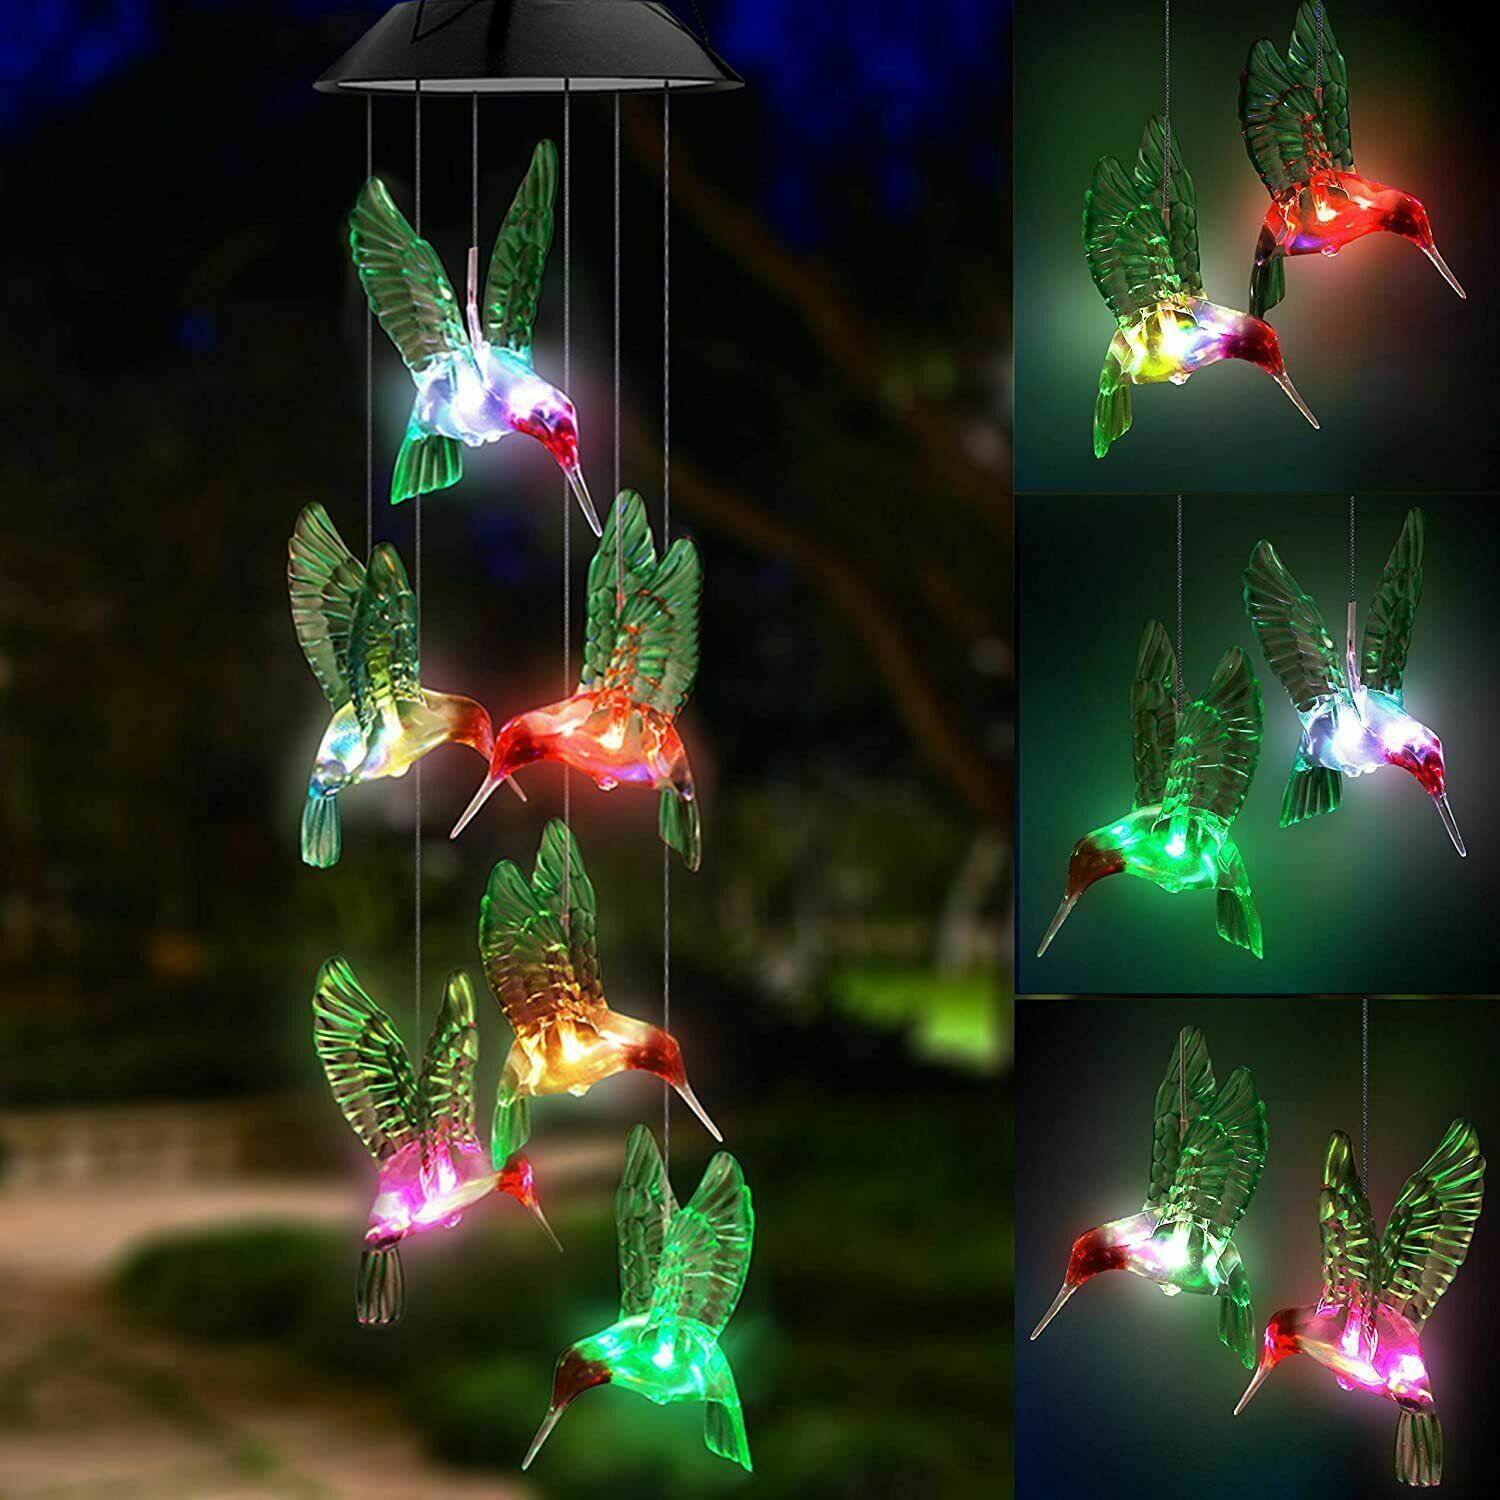 Solar Powered Color-changing Led Hummingbird Wind Chime Lights Yard Garden Decor